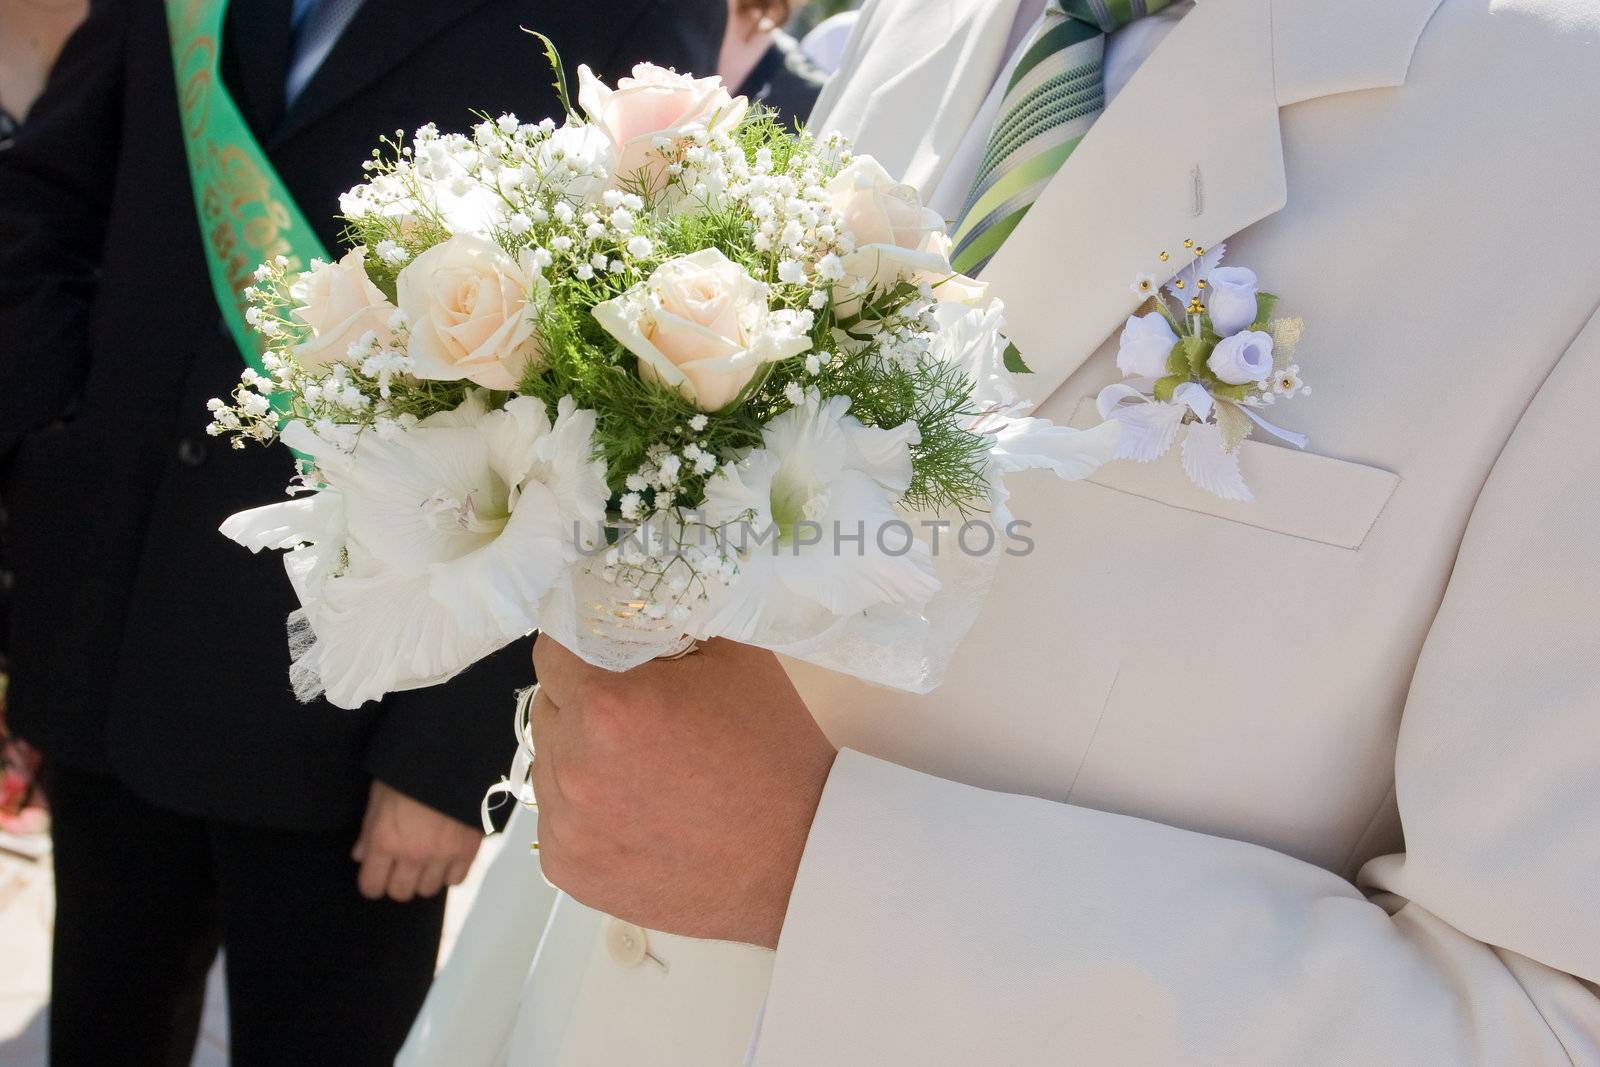 rose bouquet to the bride from groom by vsurkov